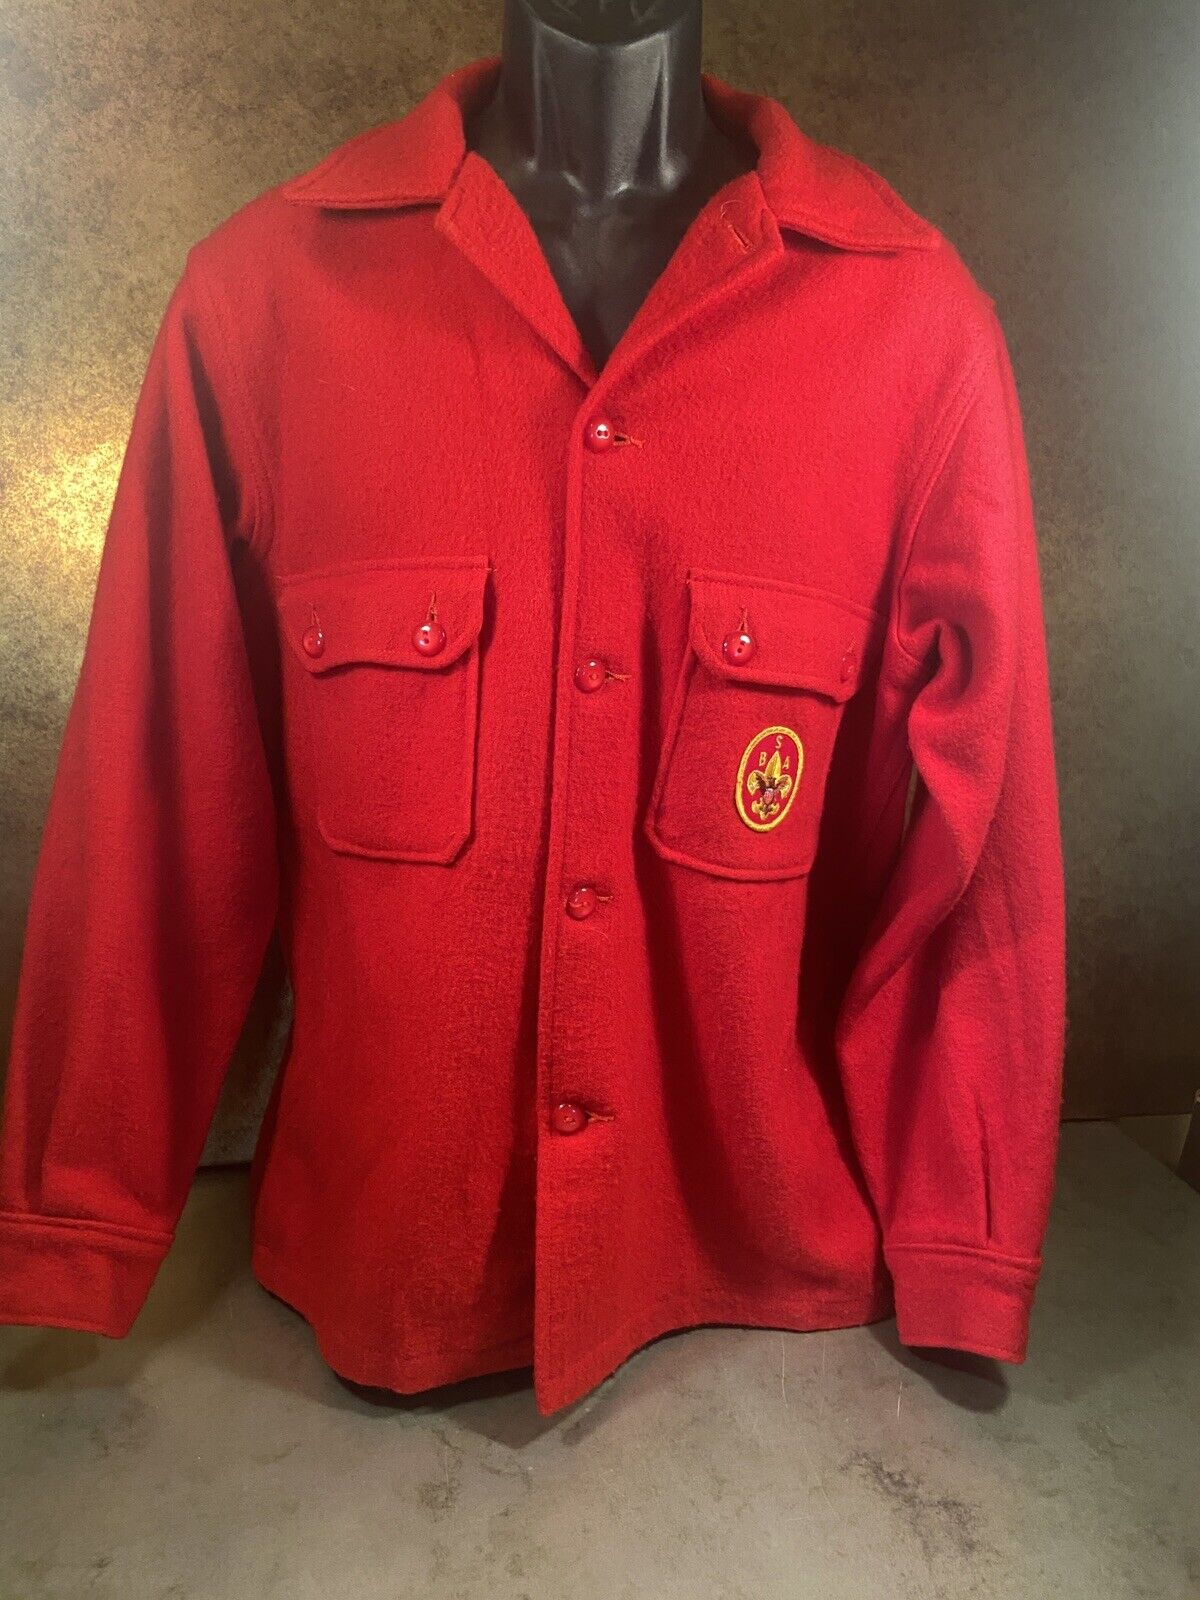 BOY SCOUTS 553 RED WOOL JACKET 42 MINT CONDITION